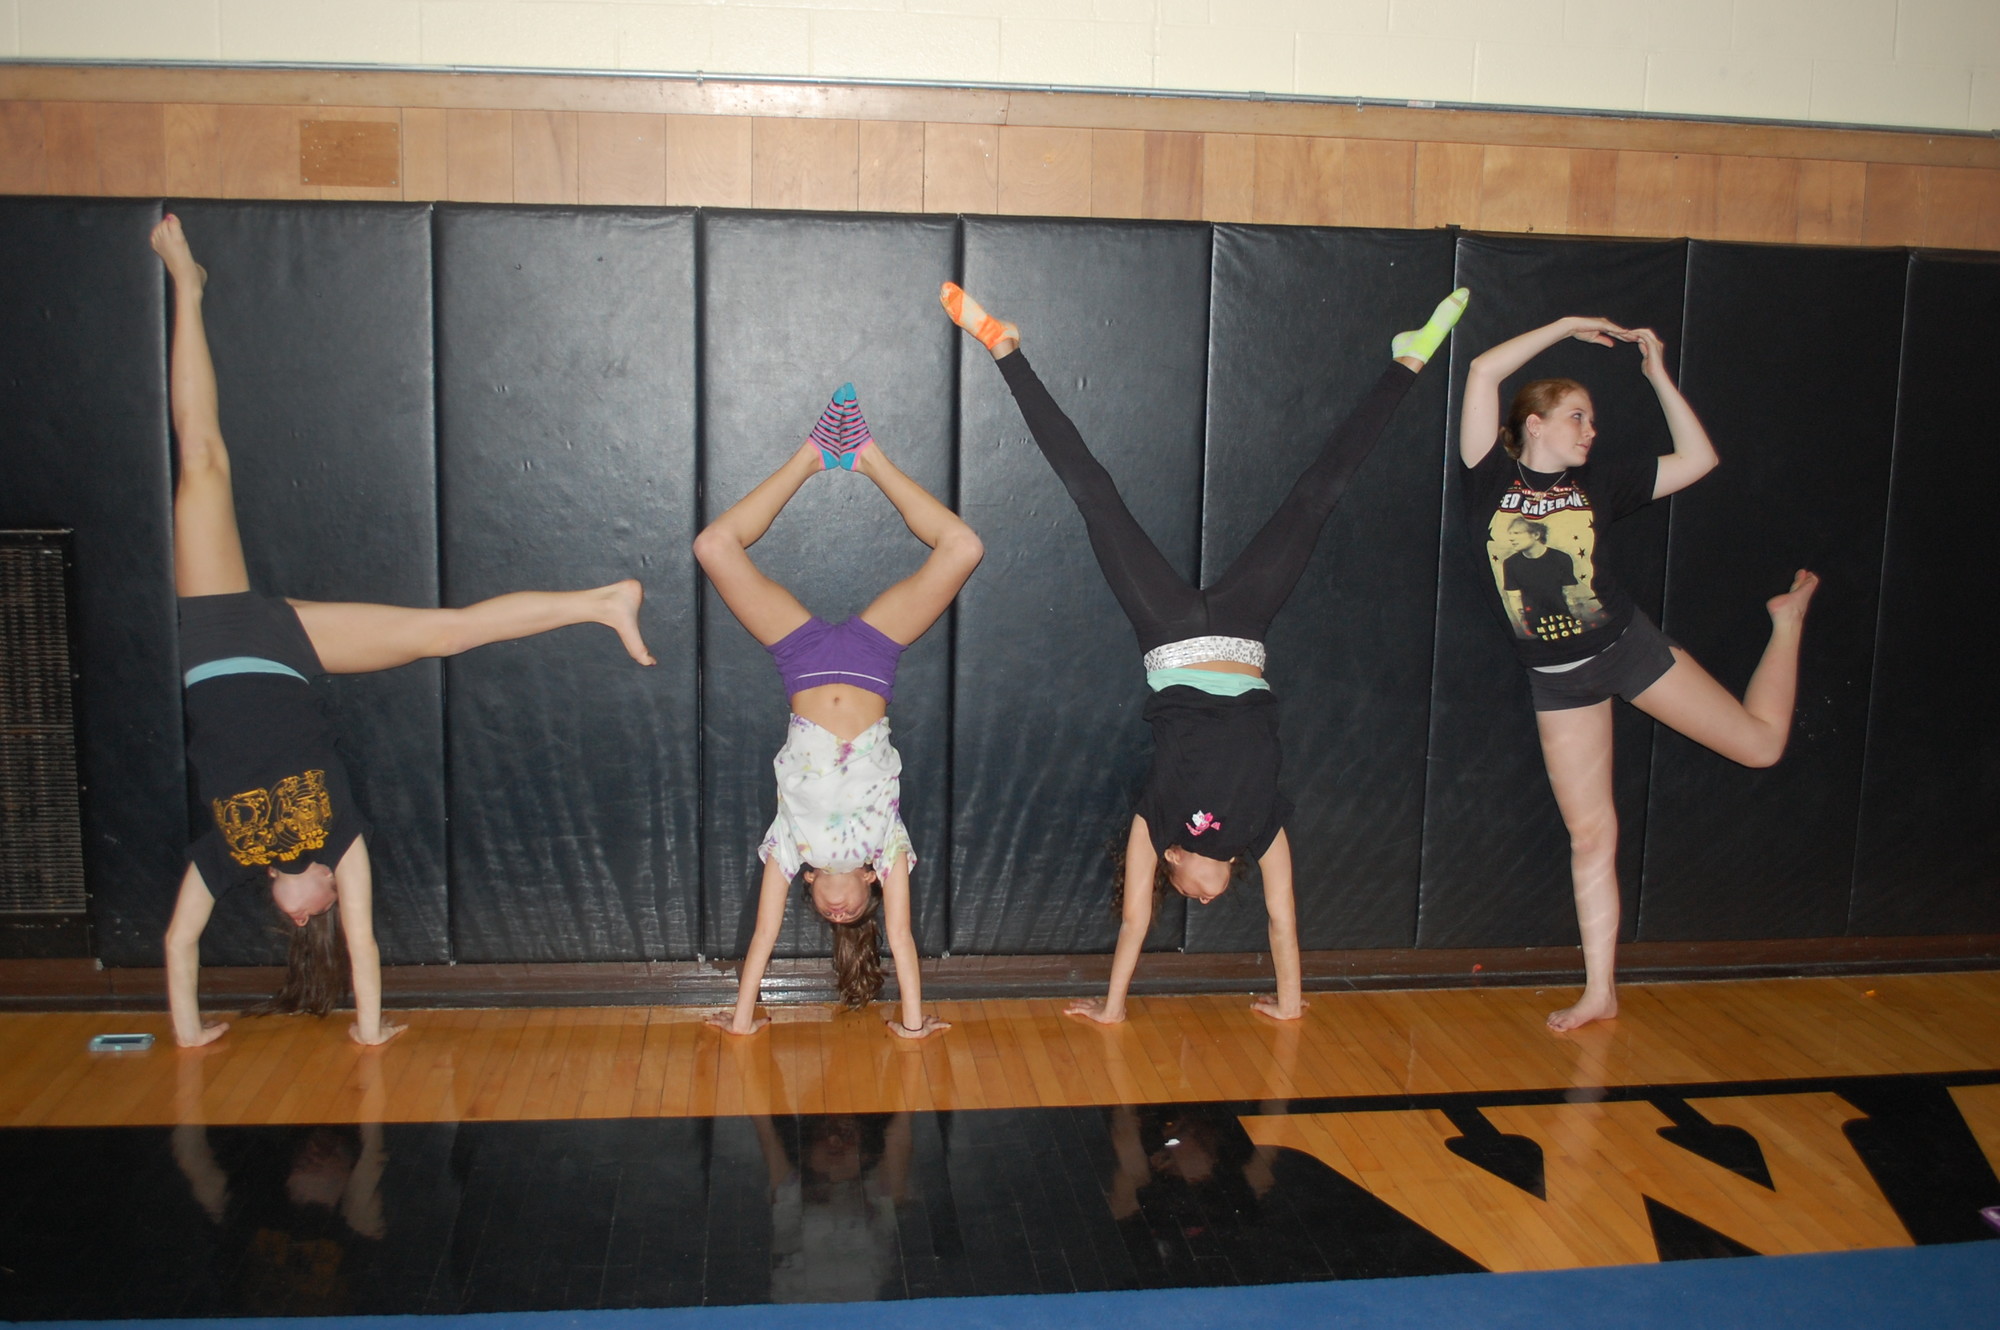 Members of the Wantagh gymnastics team spelt out "Love."